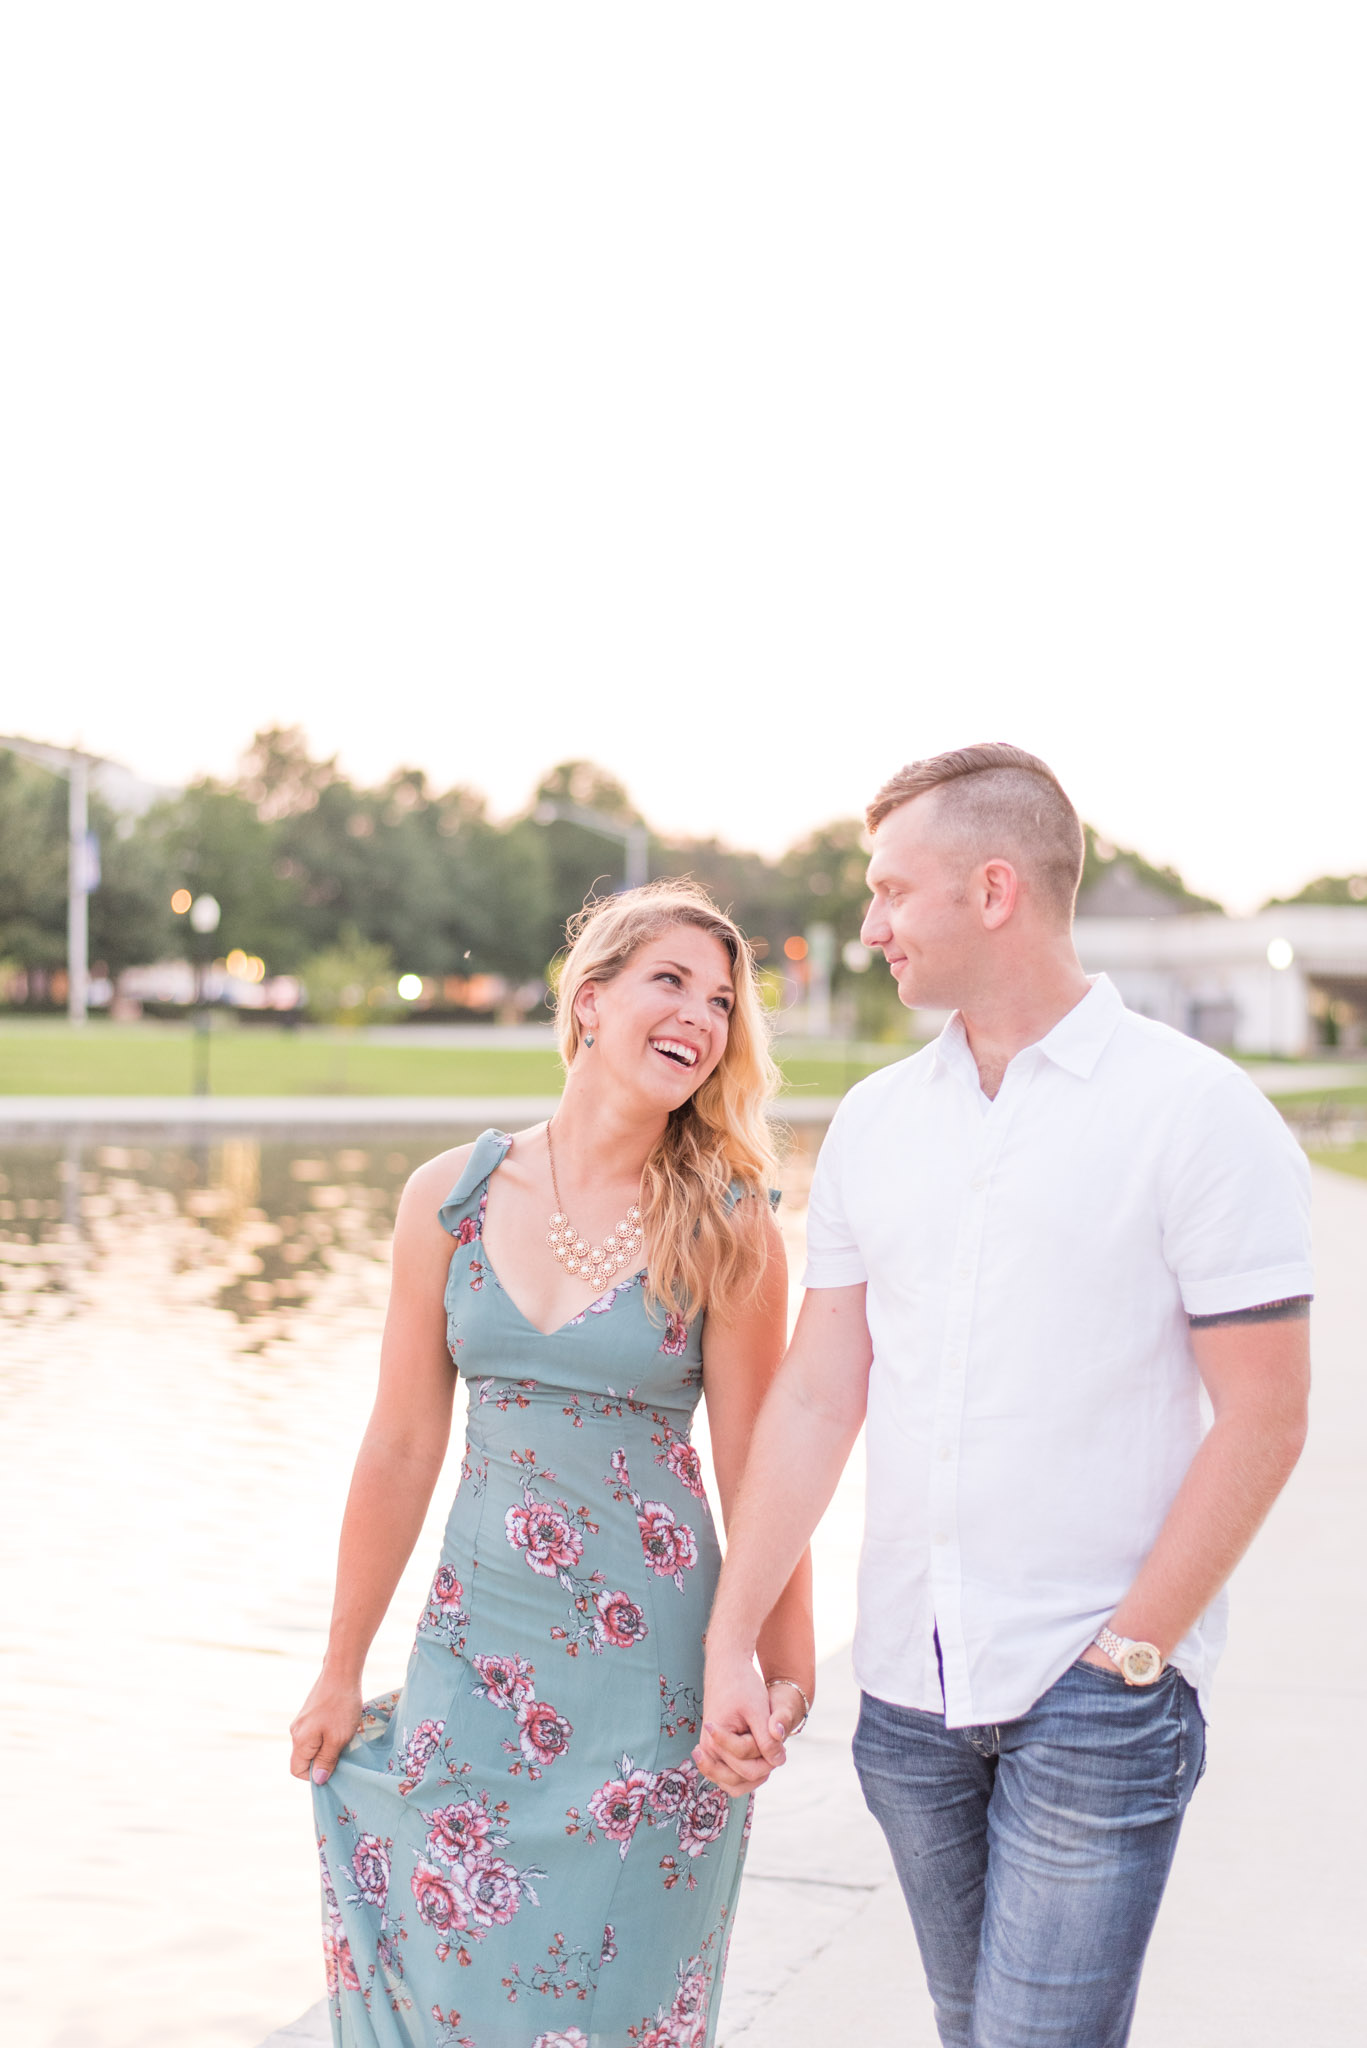 Engaged Couple Laughs While Walking in Big Spring Park. 